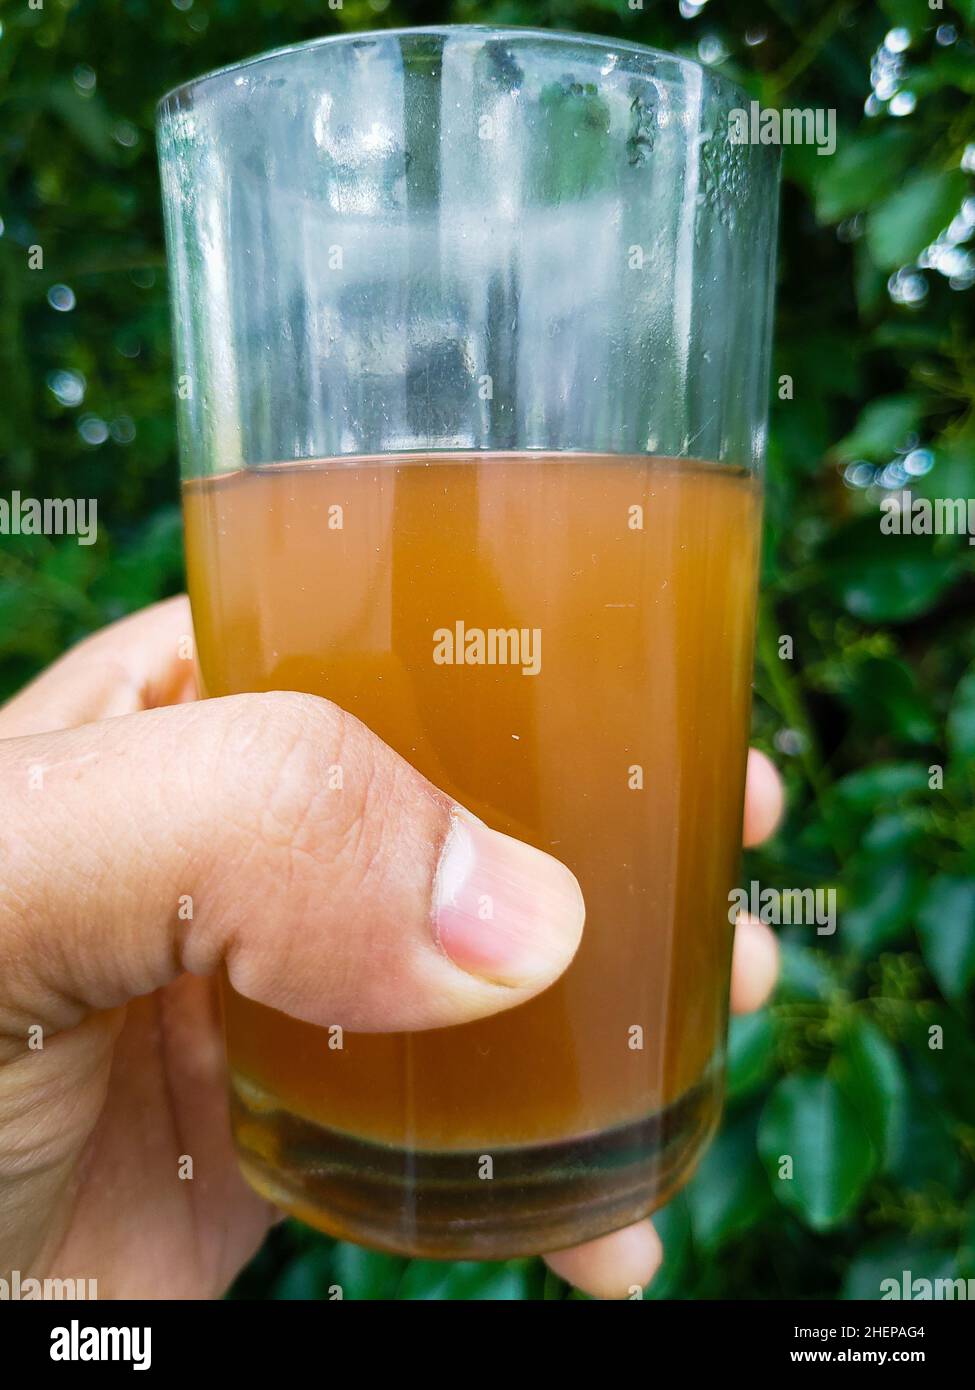 A hand holding a glass of green tea with green leaves in the background Stock Photo